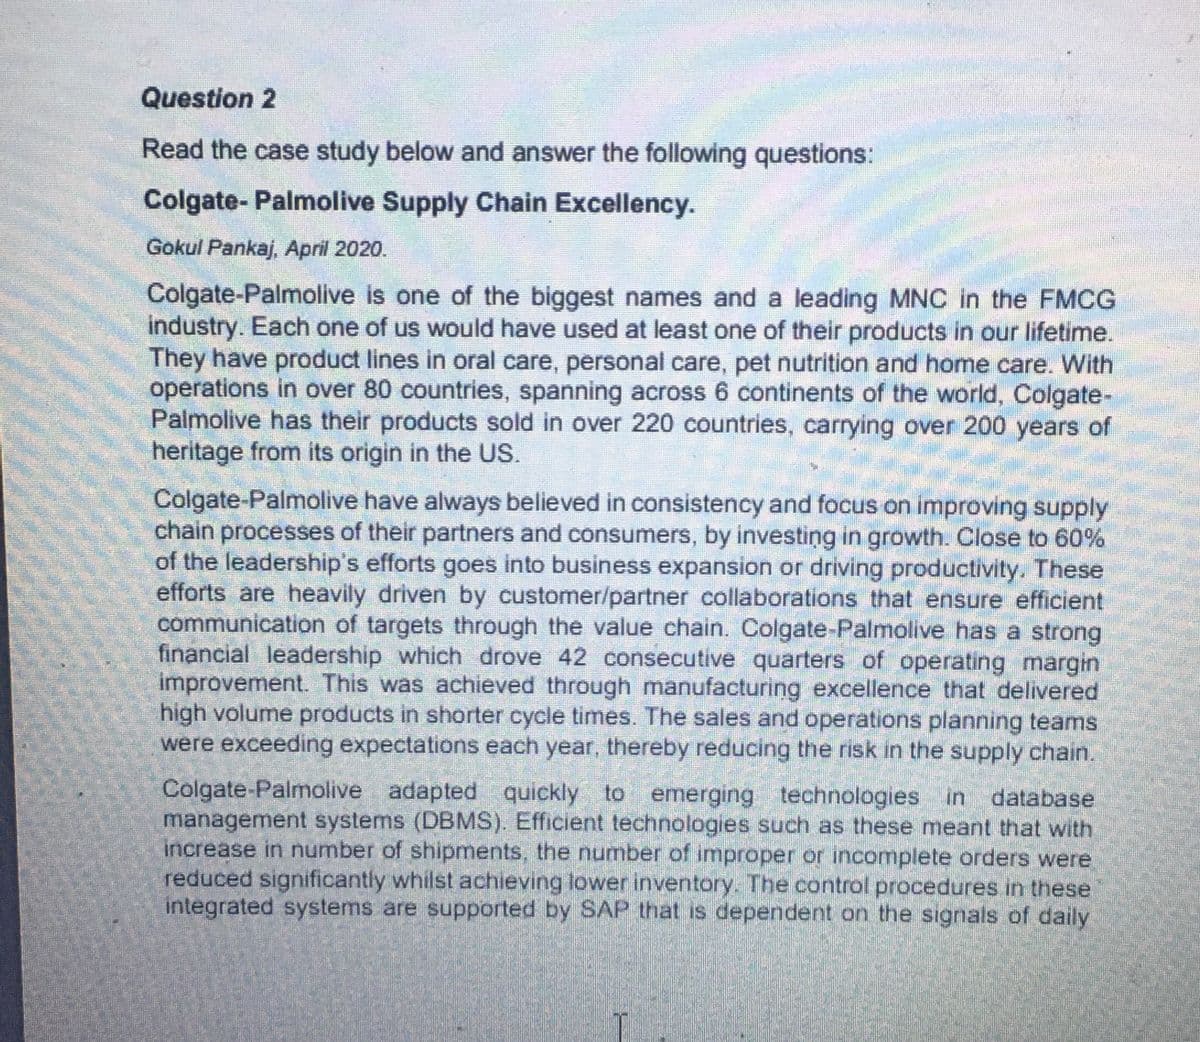 Question 2
Read the case study below and answer the following questions:
Colgate-Palmolive Supply Chain Excellency.
Gokul Pankaj, April 2020.
Colgate-Palmolive is one of the biggest names and a leading MNC in the FMCG
industry. Each one of us would have used at least one of their products in our lifetime.
They have product lines in oral care, personal care, pet nutrition and home care. With
operations in over 80 countries, spanning across 6 continents of the world, Colgate-
Palmolive has their products sold in over 220 countries, carrying over 200 years of
heritage from its origin in the US.
Colgate-Palmolive have always believed in consistency and focus on improving supply
chain processes of their partners and consumers, by investing in growth. Close to 60%
of the leadership's efforts goes into business expansion or driving productivity. These
efforts are heavily driven by customer/partner collaborations that ensure efficient
communication of targets through the value chain. Colgate-Palmolive has a strong
financial leadership which drove 42 consecutive quarters of operating margin
improvement. This was achieved through manufacturing excellence that delivered
high volume products in shorter cycle times. The sales and operations planning teams
were exceeding expectations each year, thereby reducing the risk in the supply chain.
Colgate-Palmolive adapted quickly to emerging technologies in database.
management systems (DBMS). Efficient technologies such as these meant that with
increase in number of shipments, the number of improper or incomplete orders were
reduced significantly whilst achieving lower inventory. The control procedures in these
integrated systems are supported by SAP that is dependent on the signals of daily